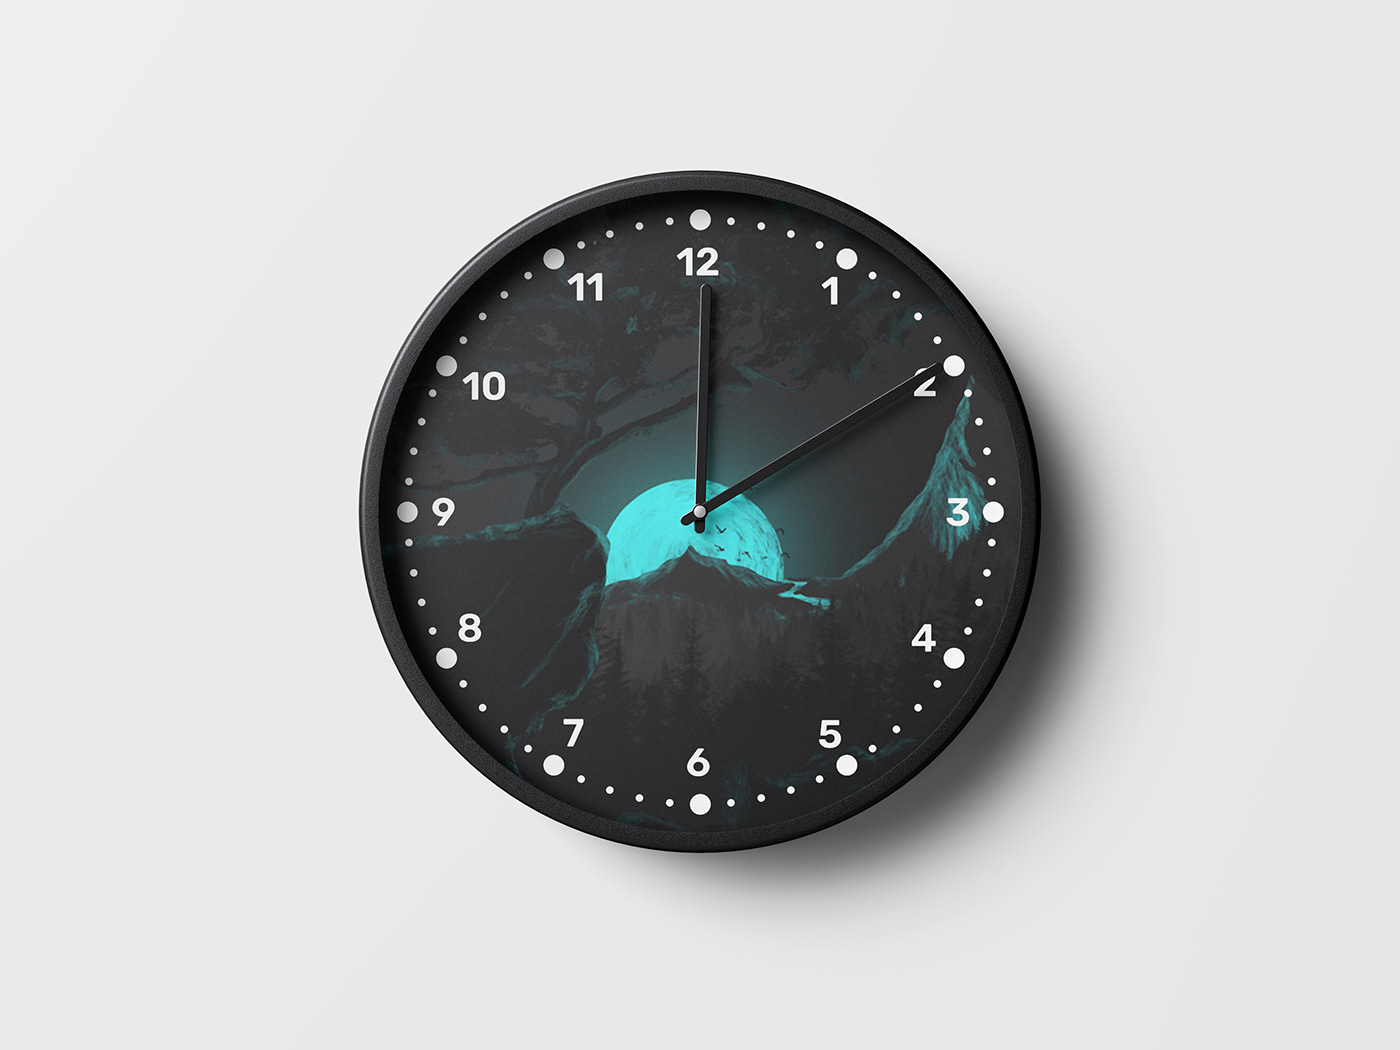 The Wall Clock Design and Creation project is focused on developing a unique and visually appealing 